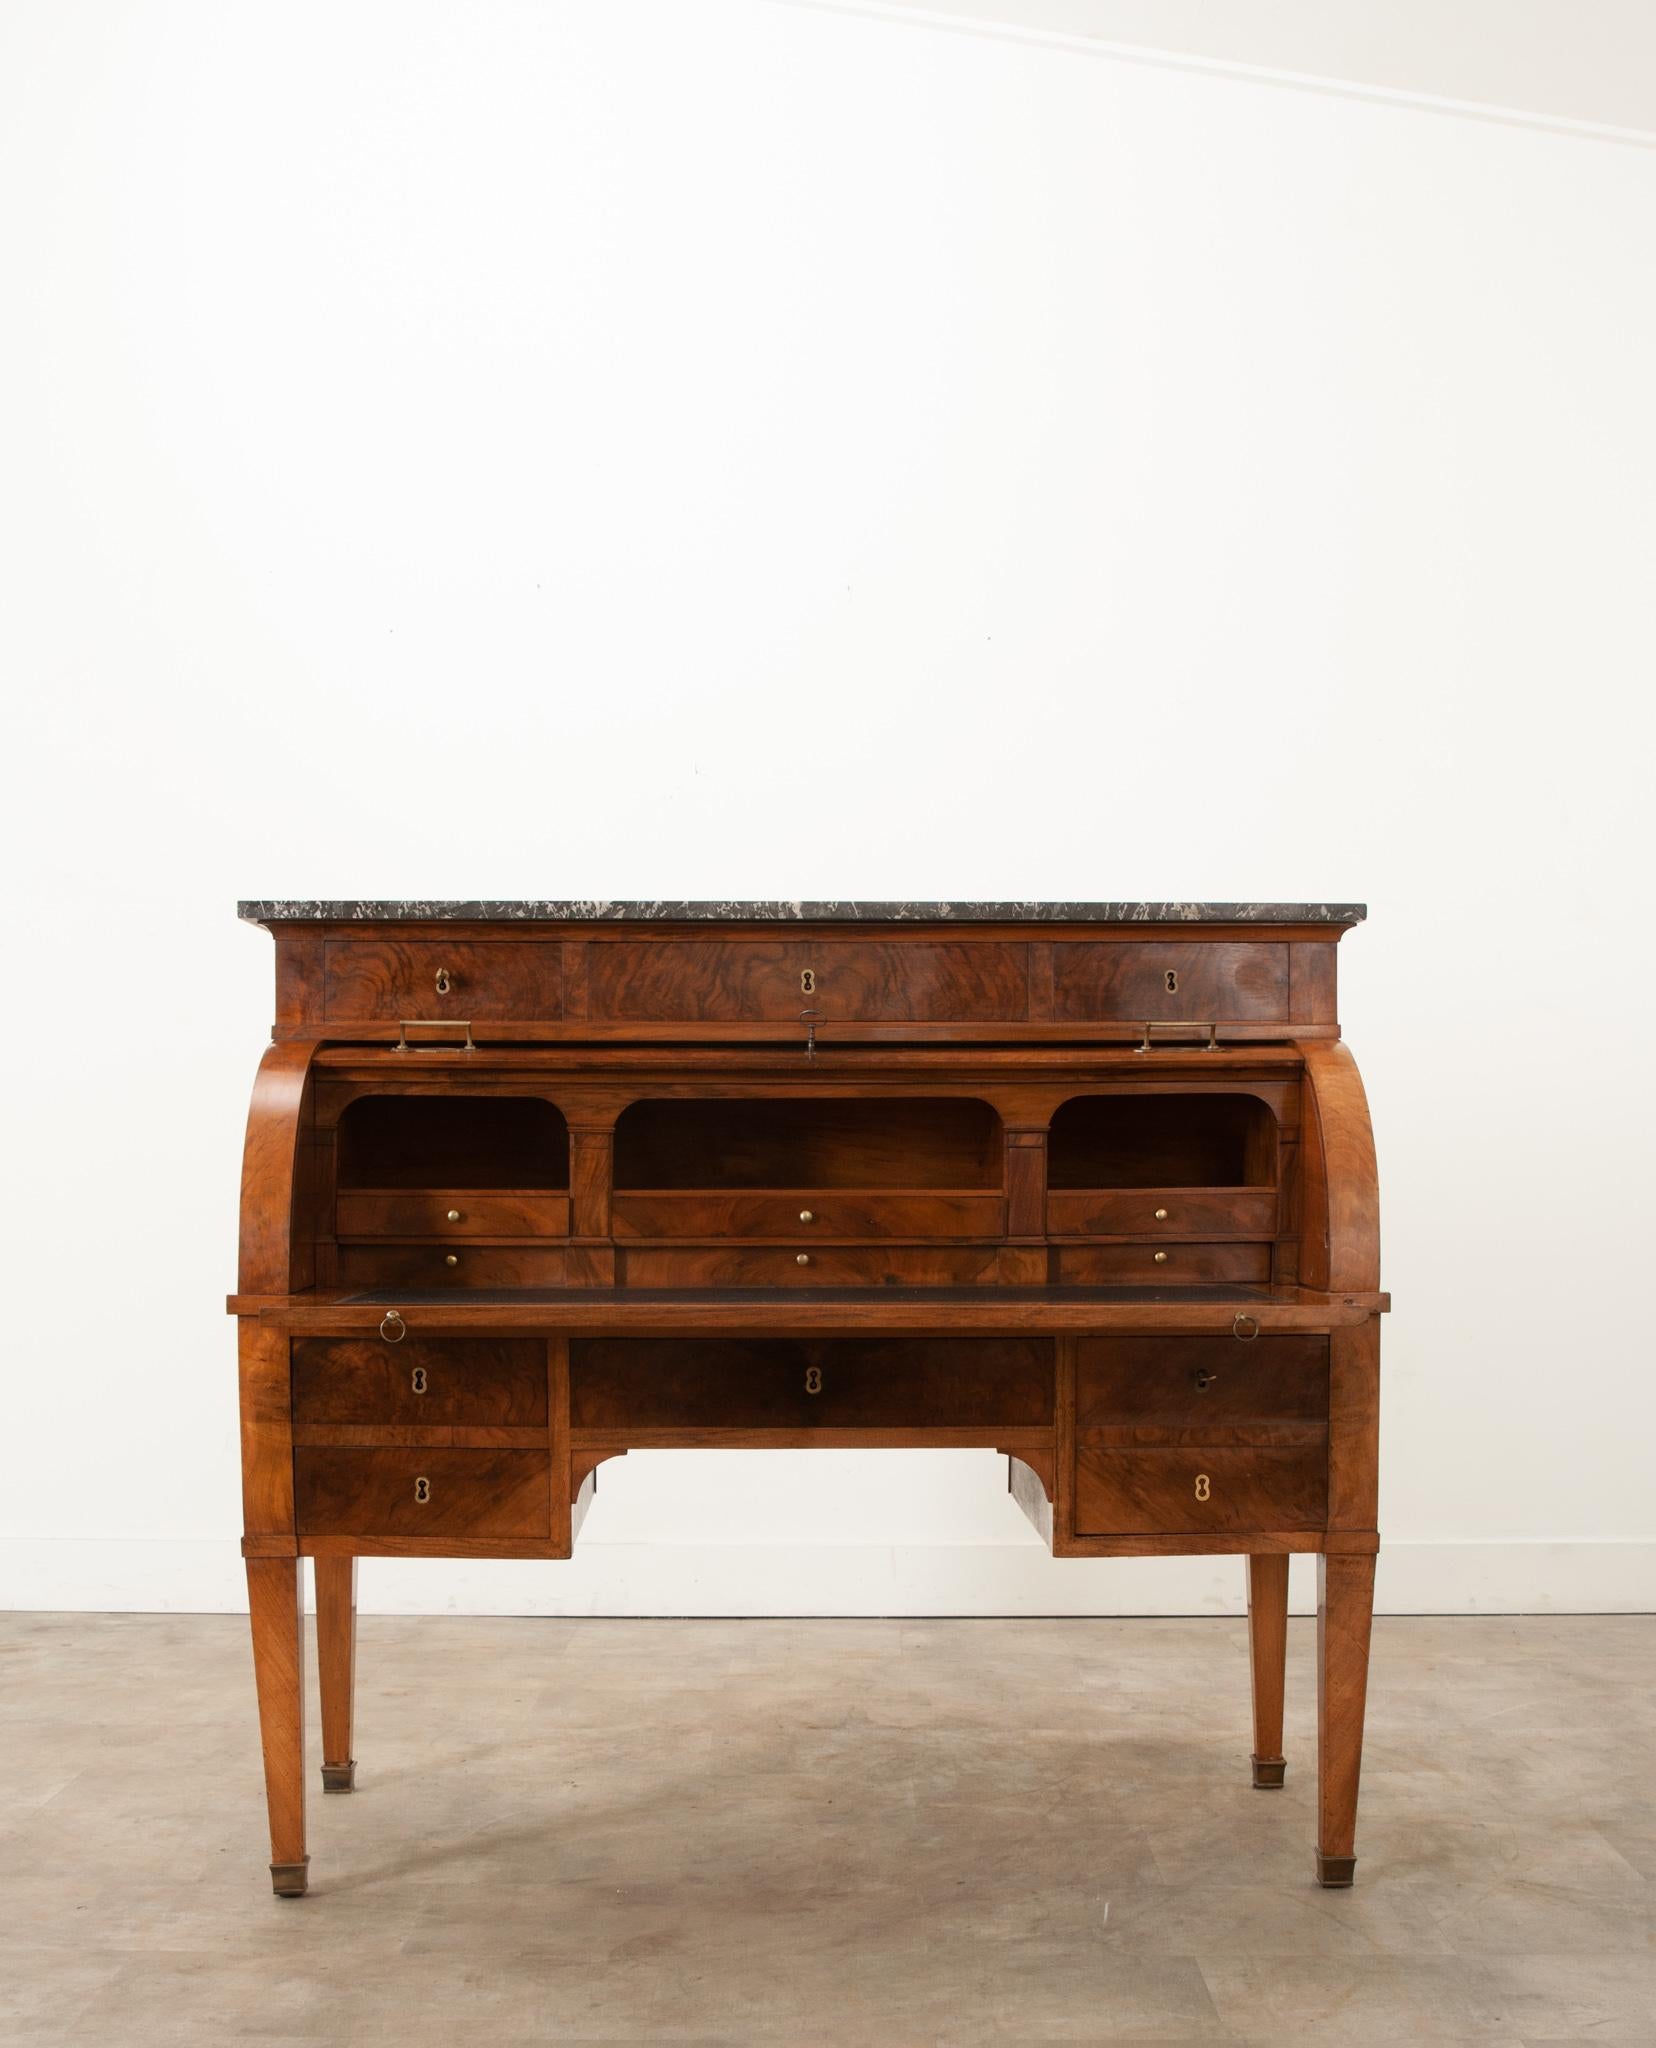 A handsome and classically designed French Directoire “D” roll top desk. The desk is topped with a polished piece of  St. Anne gris marble. Directly beneath the marble are three drawers with beautiful bookmatched burl mahogany drawer fronts and